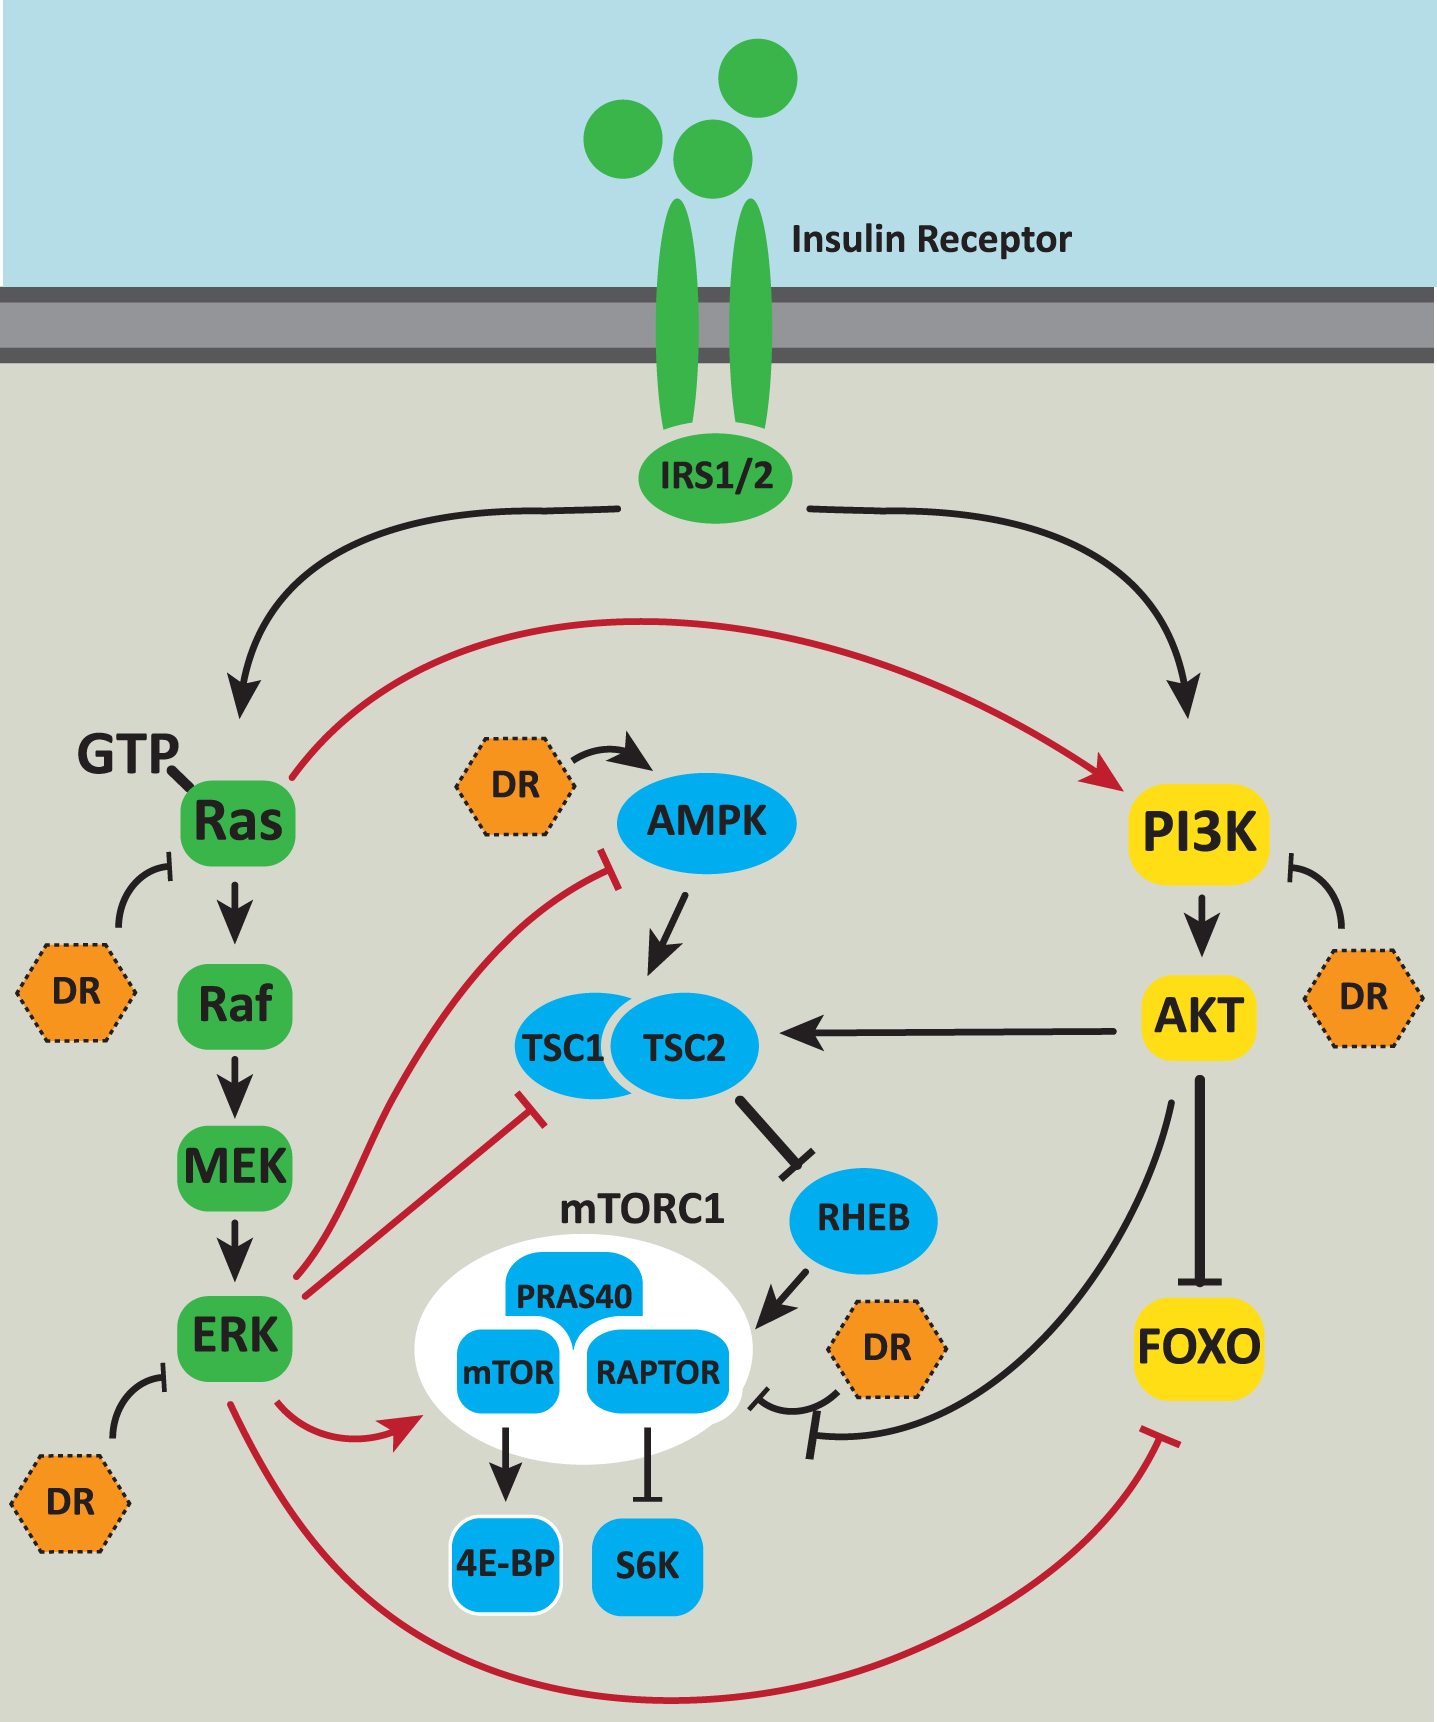 Integration of Ras/MAPK signaling with other aging pathways. The Ras/MAPK signaling pathway is intricately connected to other cellular pathways that impact on aging. Ras signaling is activated downstream of the activated insulin receptor. Ras can directly bind to and allosterically activate PI3K. Activated ERK phosphorylates an inhibitory site on AMPK negatively regulating its activation. Phosphorylation of the TSC by ERK increases mTORC1 activity. Phosphorylation by ERK inhibits the TSC’s GAP function [76] thereby increasing mTORC1 activity. ERK also activates mTORC1 via phosphorylation of RAPTOR. ERK phosphorylation of the FOXO3A transcription factor leads to FOXO3A degradation via the ubiquitin proteasome system. Dietary restriction (DR) inhibits Ras-GTP and ERK activity, activates AMPK, inhibits mTOR and may inhibit insulin signaling via PI3K and AKT. Positive regulatory interactions are indicated by arrows. Negative regulatory interactions are shown as blunt-ended lines.